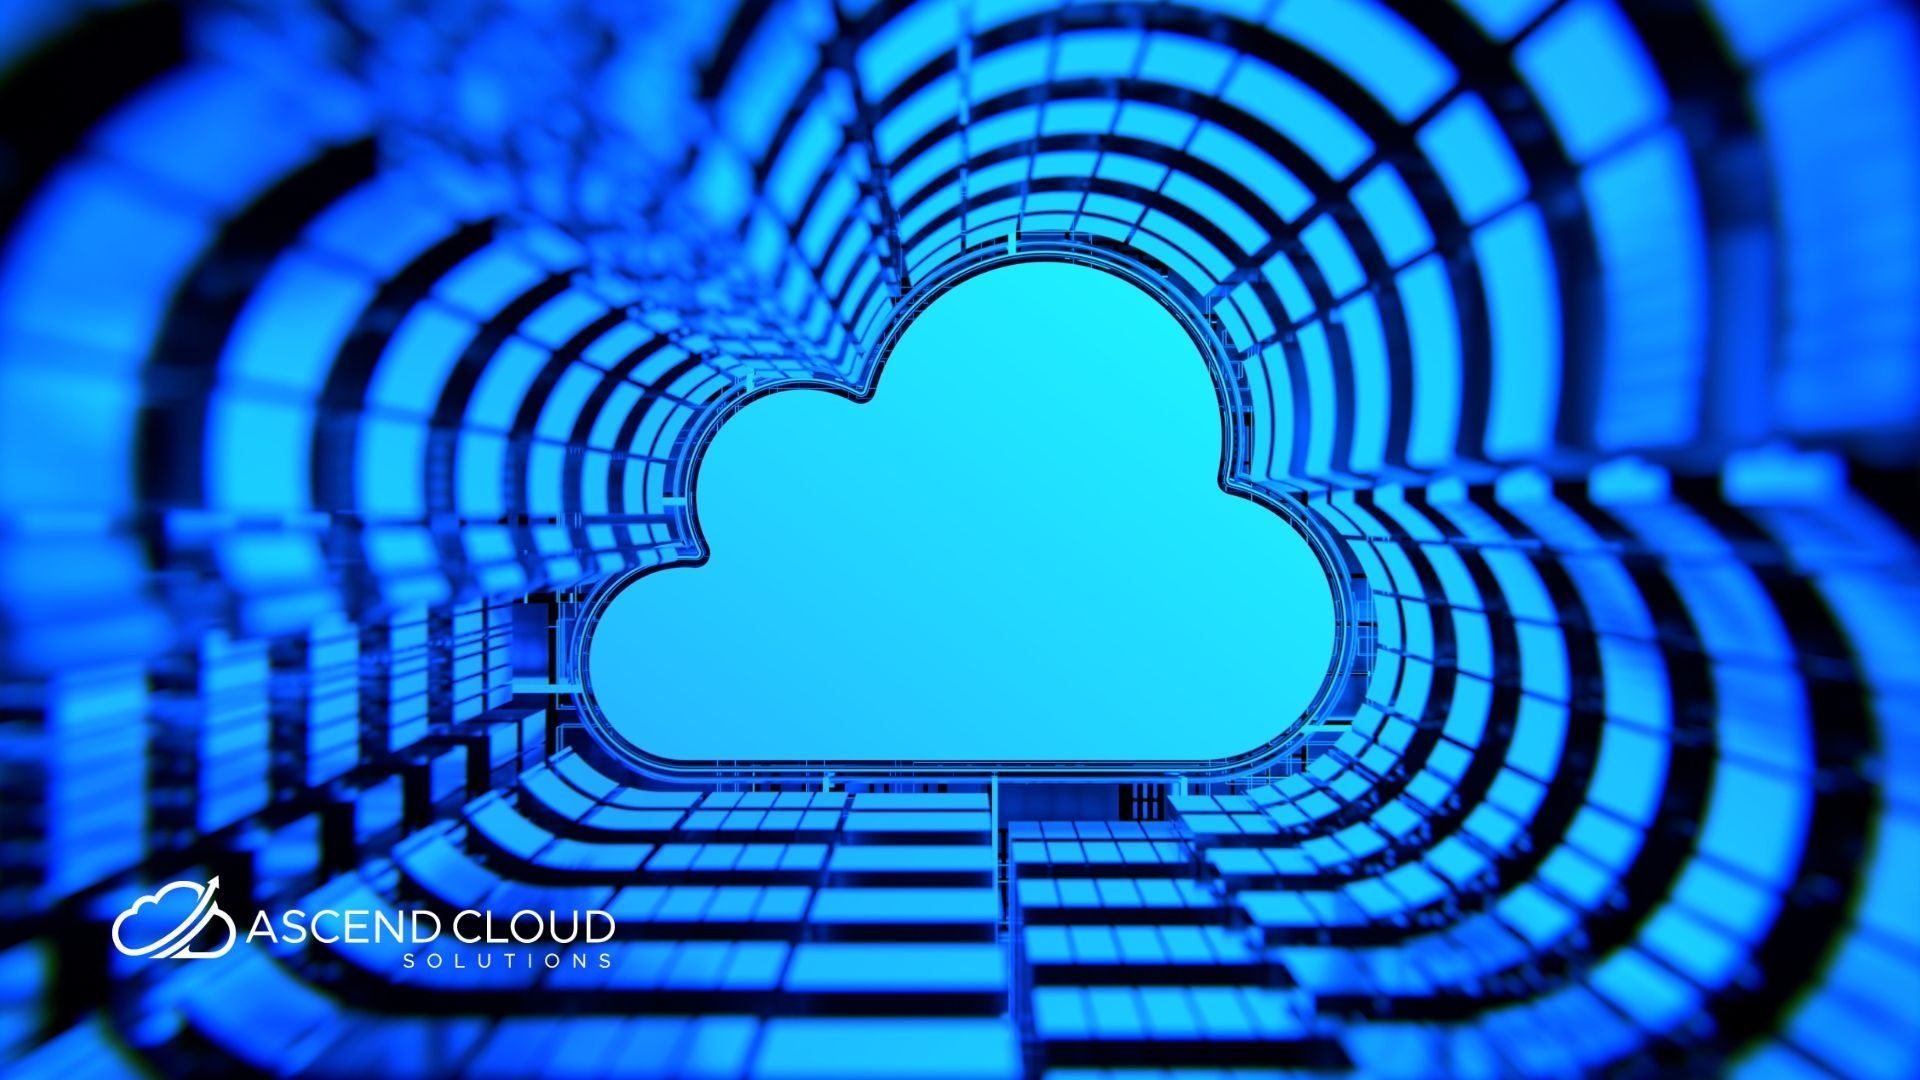 Finding it hard to manage your cloud budget wisely? FinOps could be the answer. Find out more 